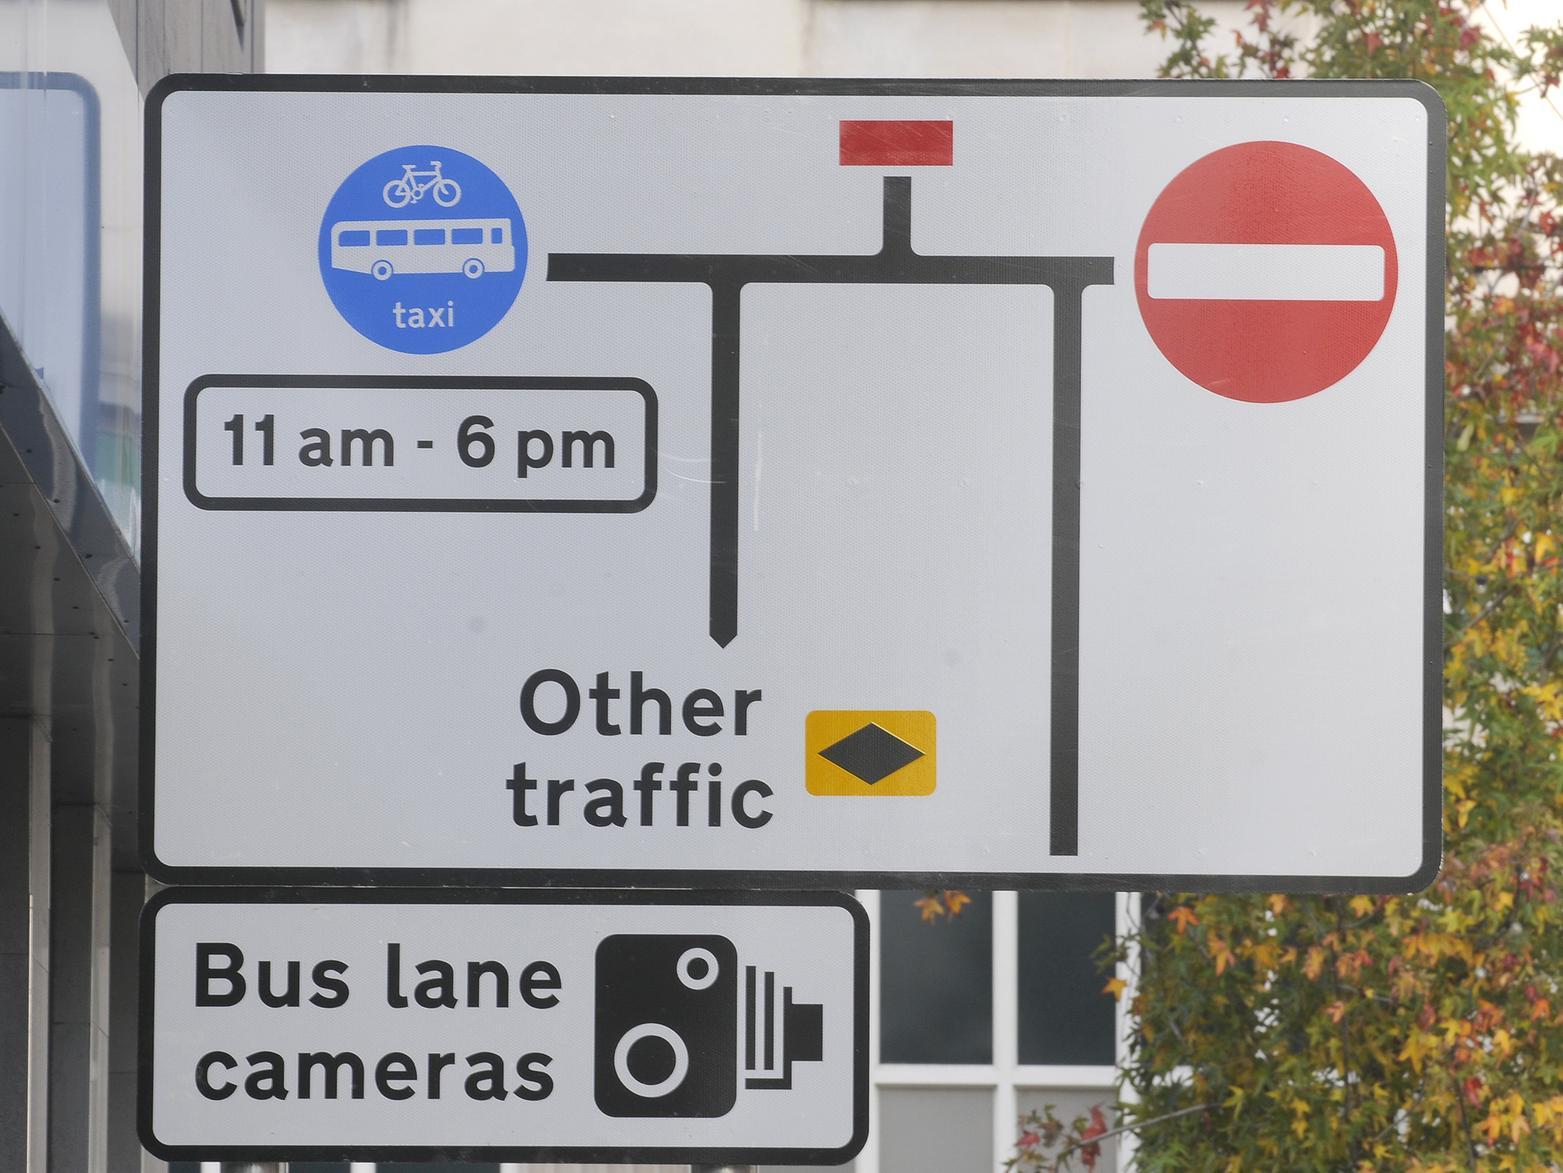 The introduction of the Fishergate bus lanes proved controversial.The move was designed to cut traffic volumes and jams in town, but thousands of motorists failed to spot the new regulations resulting in a 60 penalty in the post.